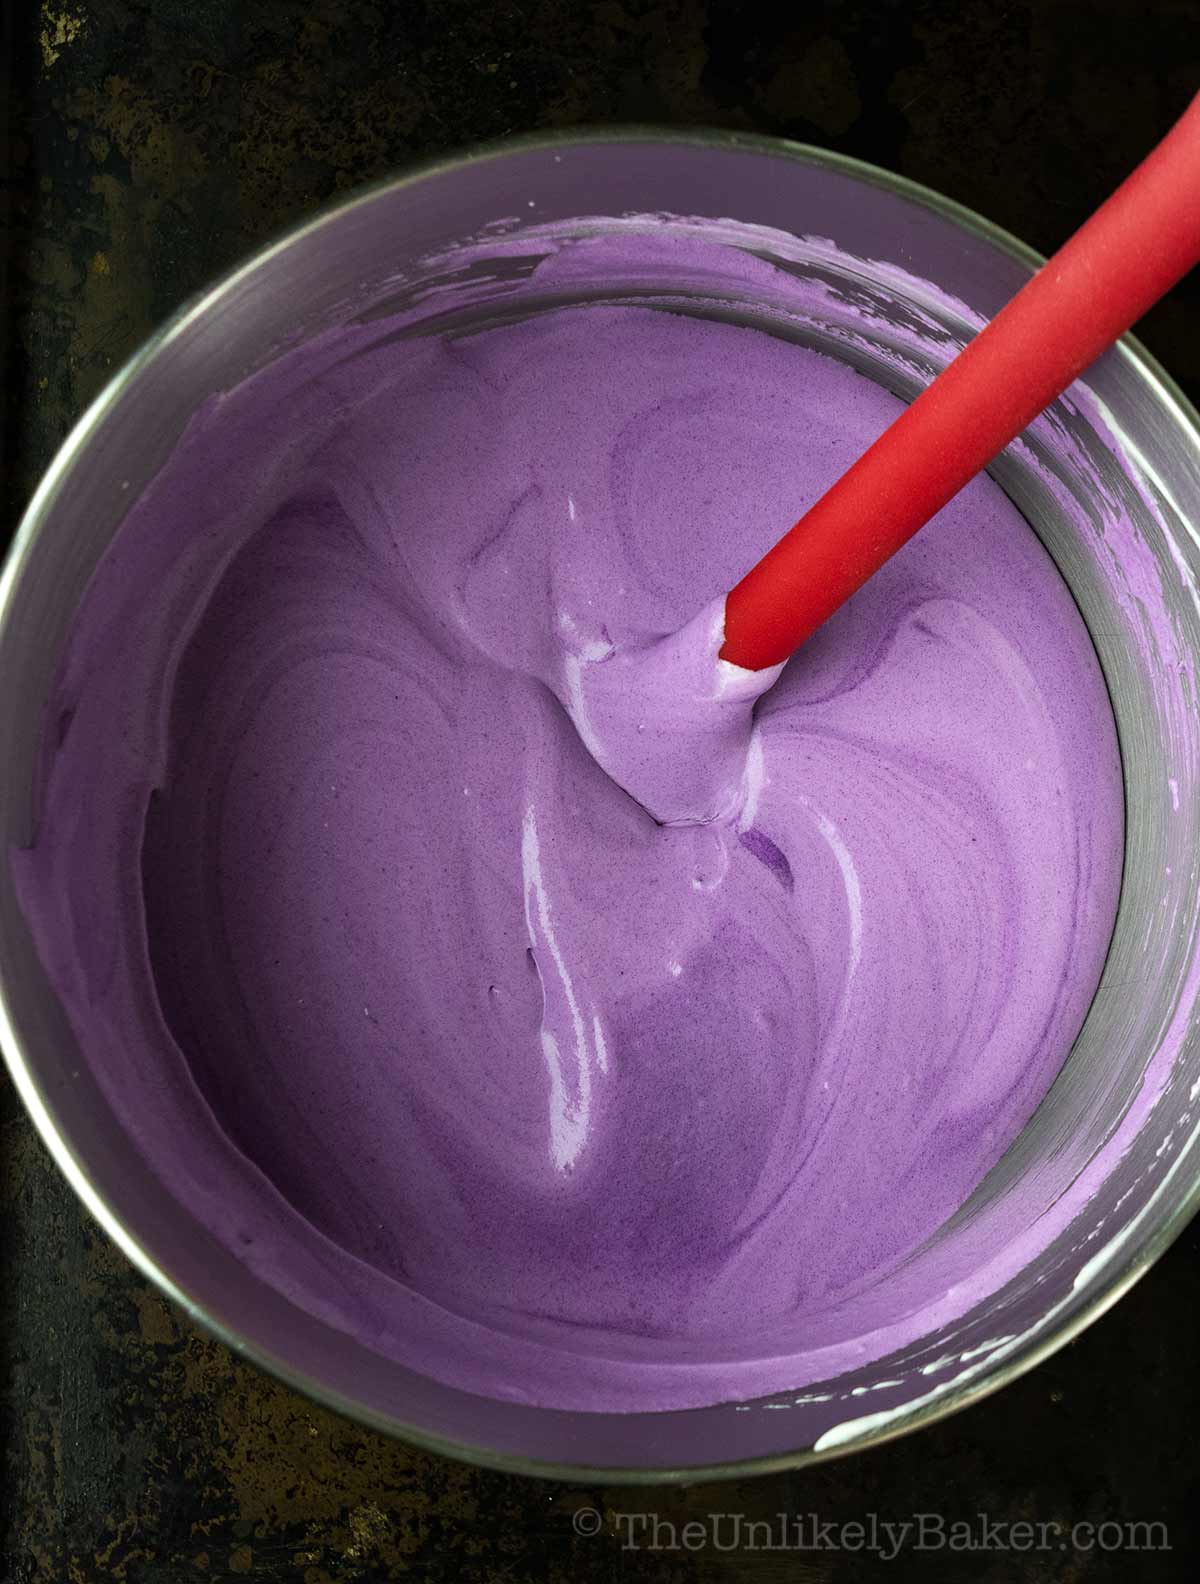 Purple yam ice cream mixture in a bowl.